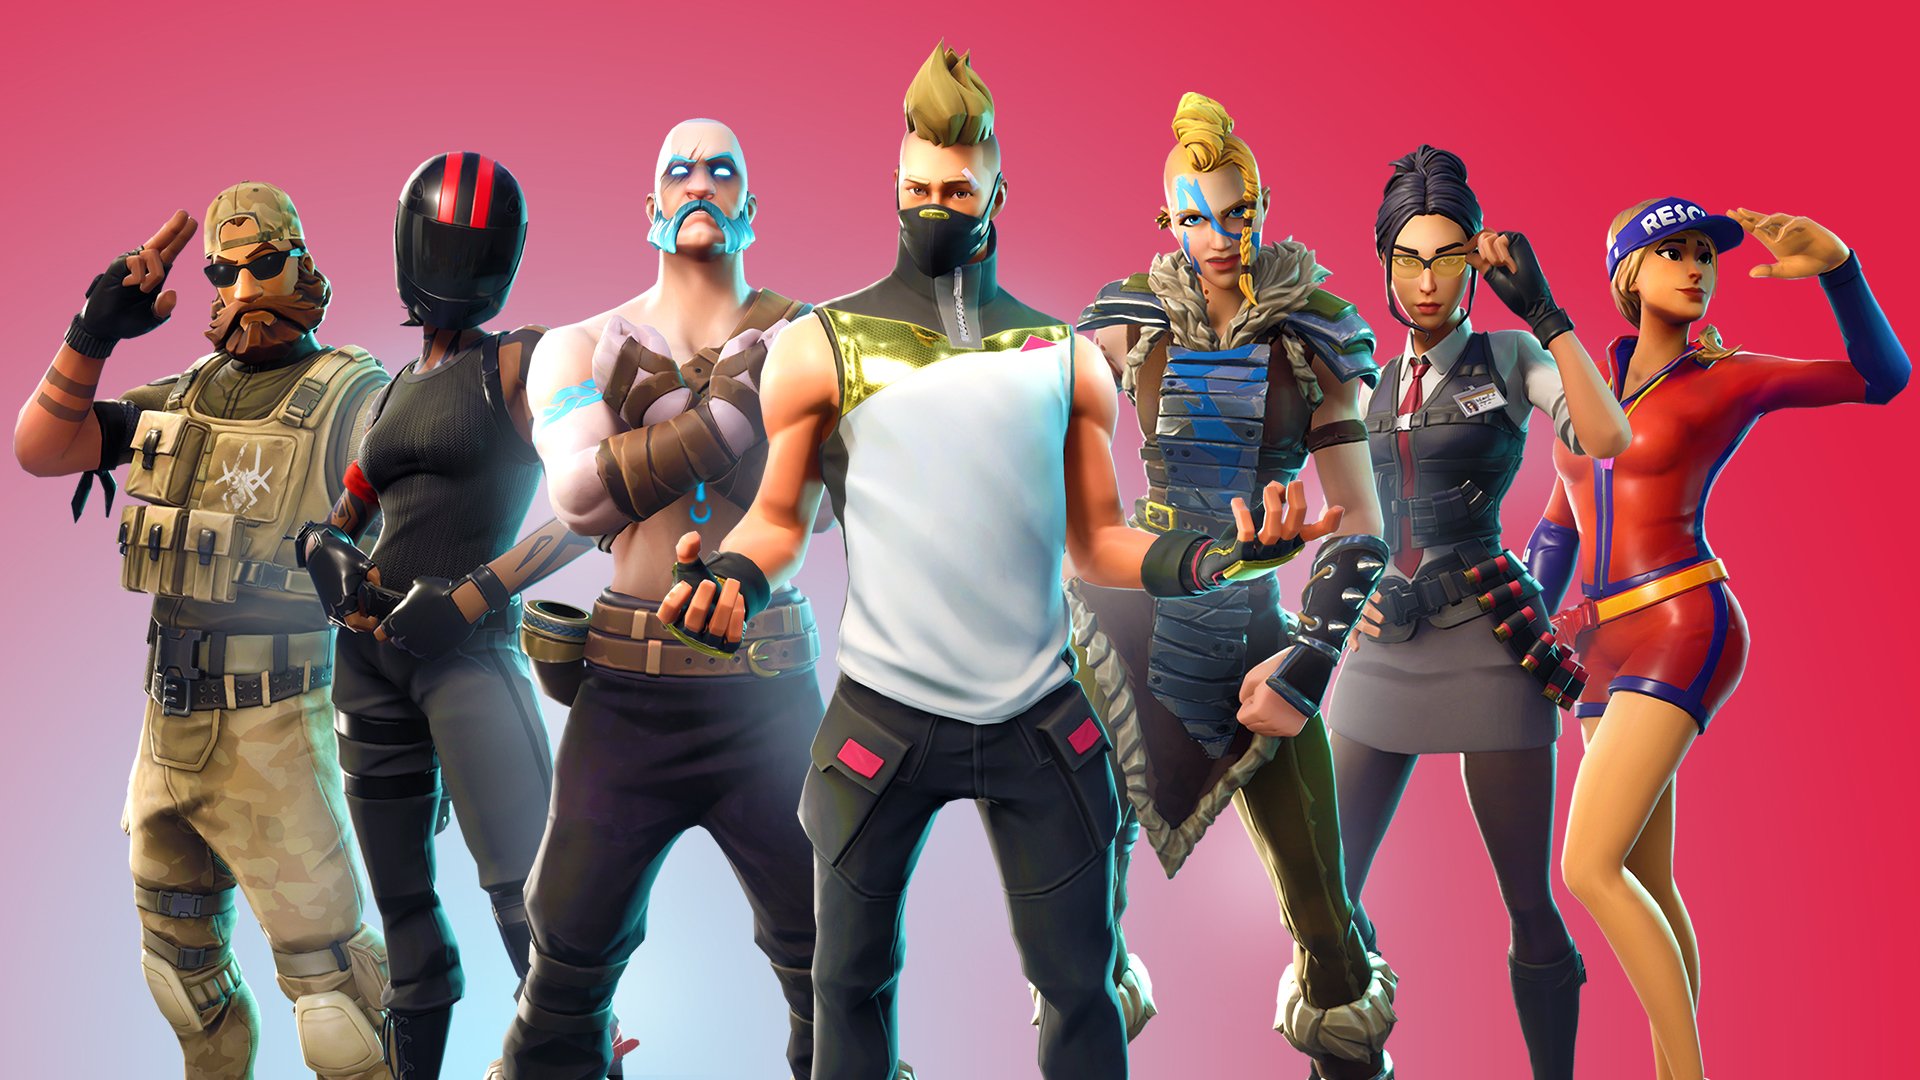 Fortnite for Android is now available on Samsung Galaxy ... - 1920 x 1080 jpeg 1345kB